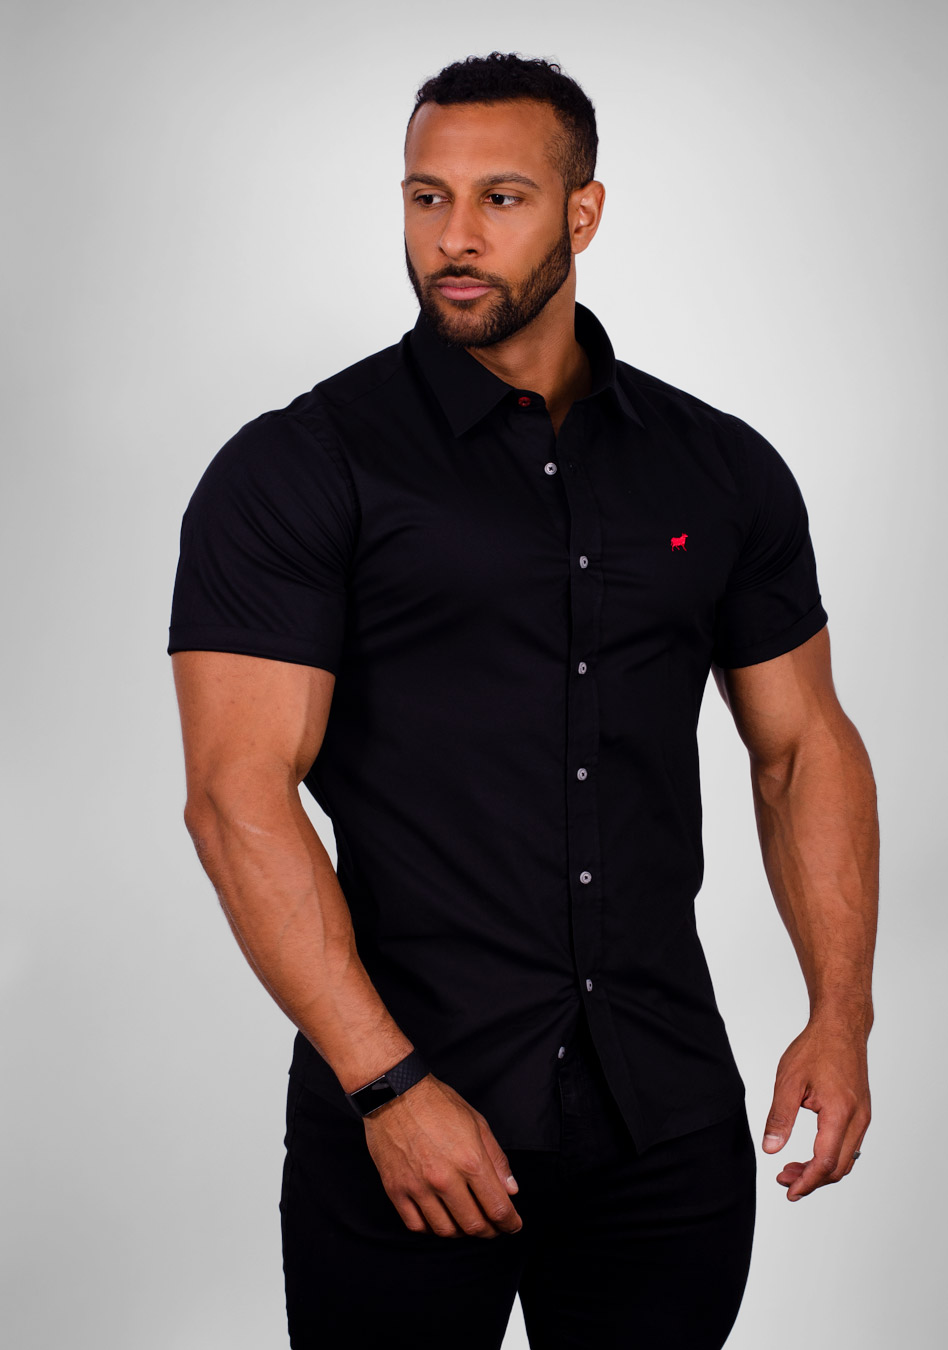 Muscle Fit vs Slim Fit Shirts – What's the Difference? – Tapered